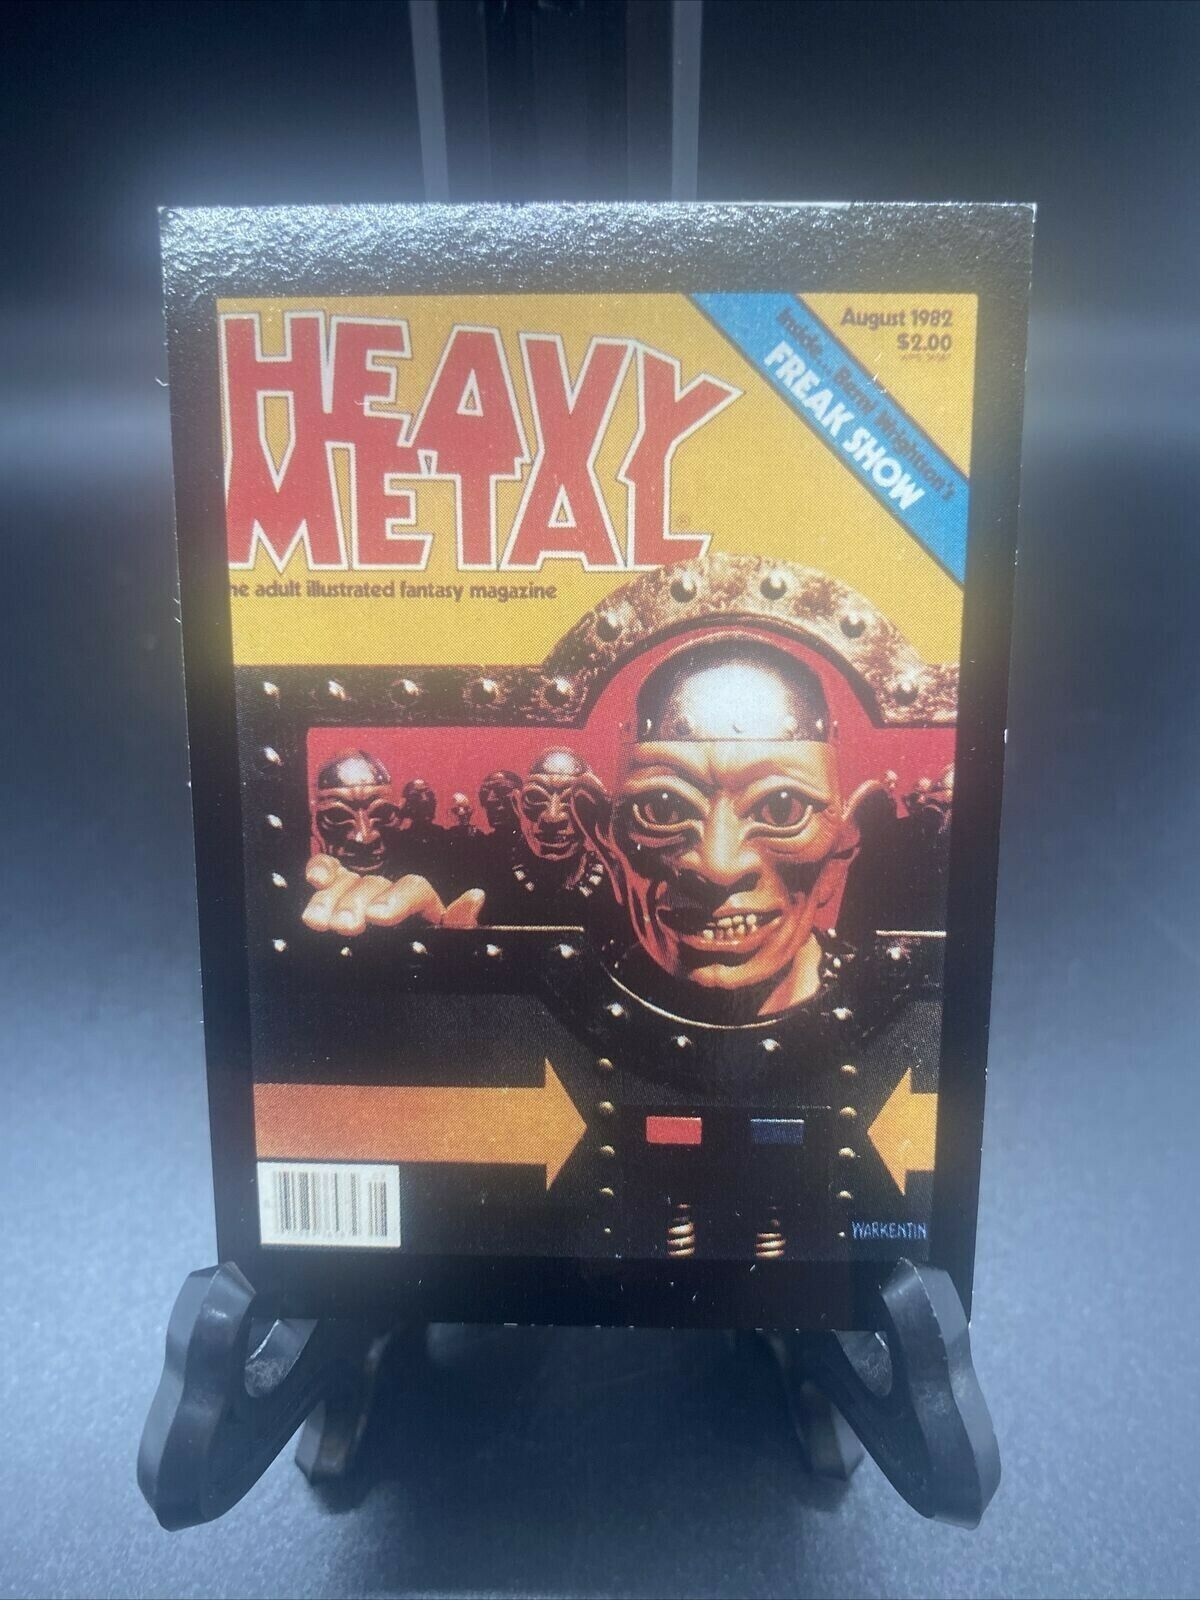 Primary image for Vintage 1982 Heavy Metal Trading Card No. 37 August 1982 Freak Show 